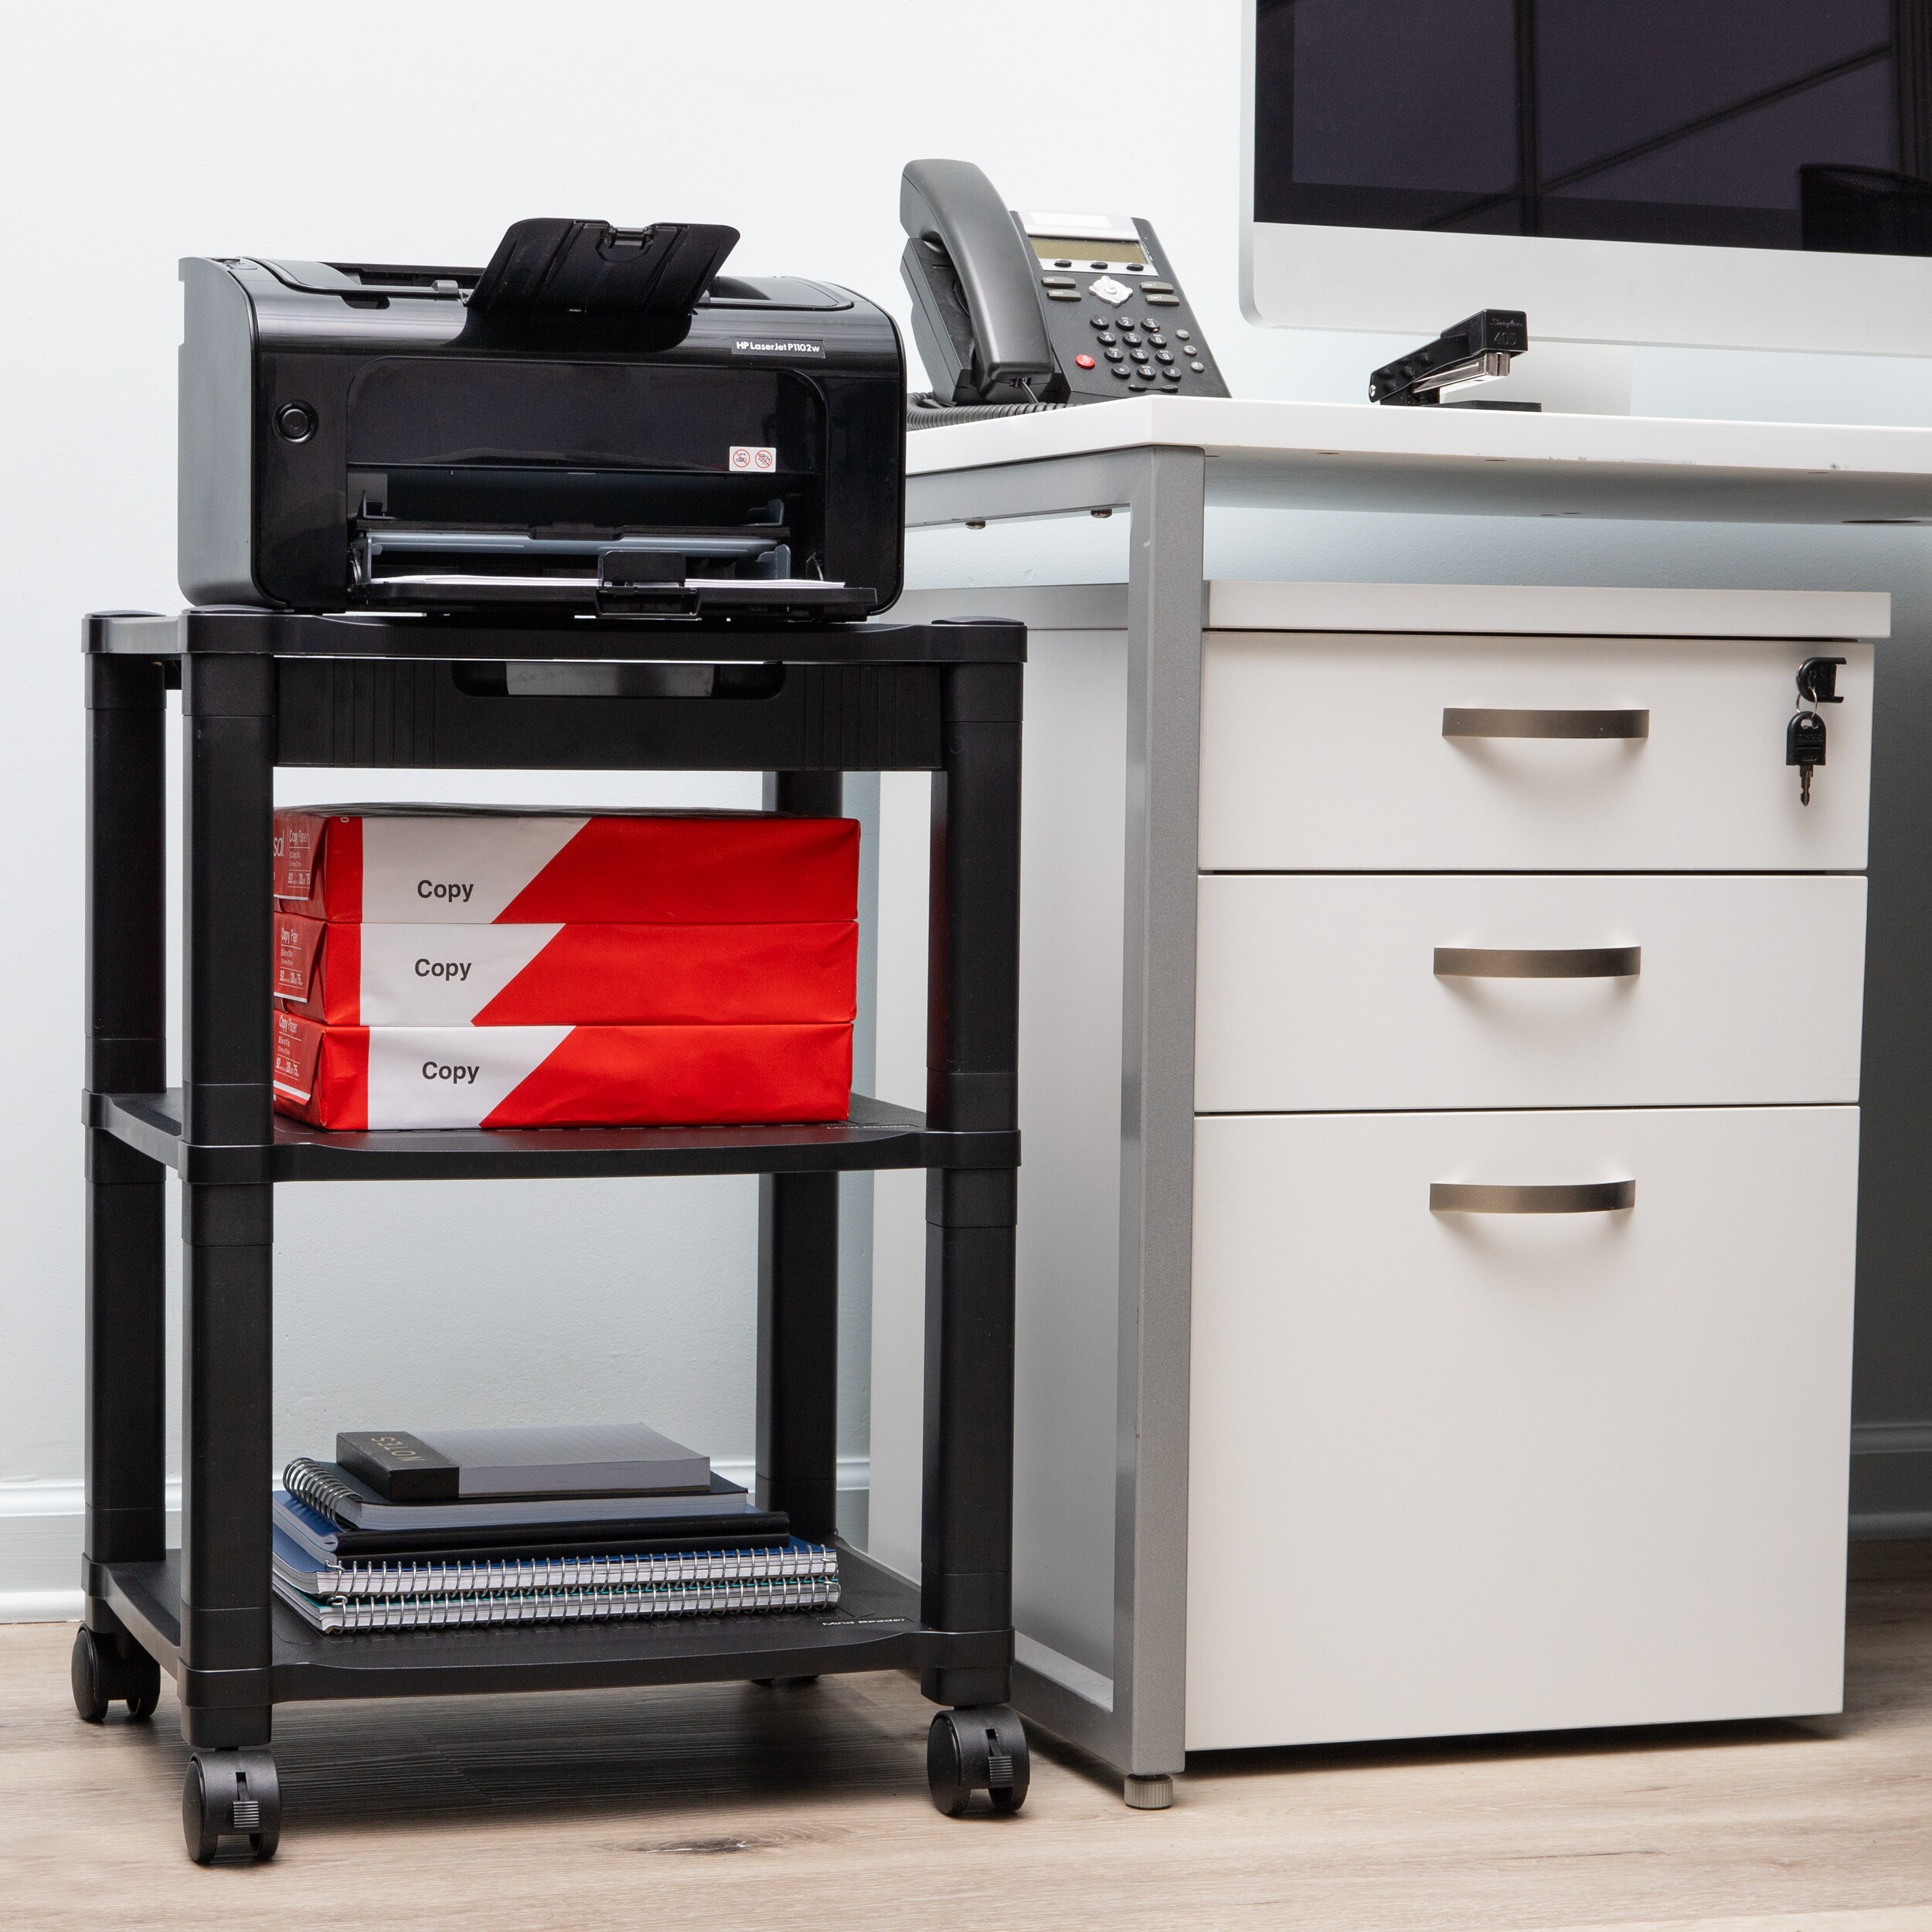 Printer Stand - Under Desk Printer Stand with Cable Management & Storage Drawers